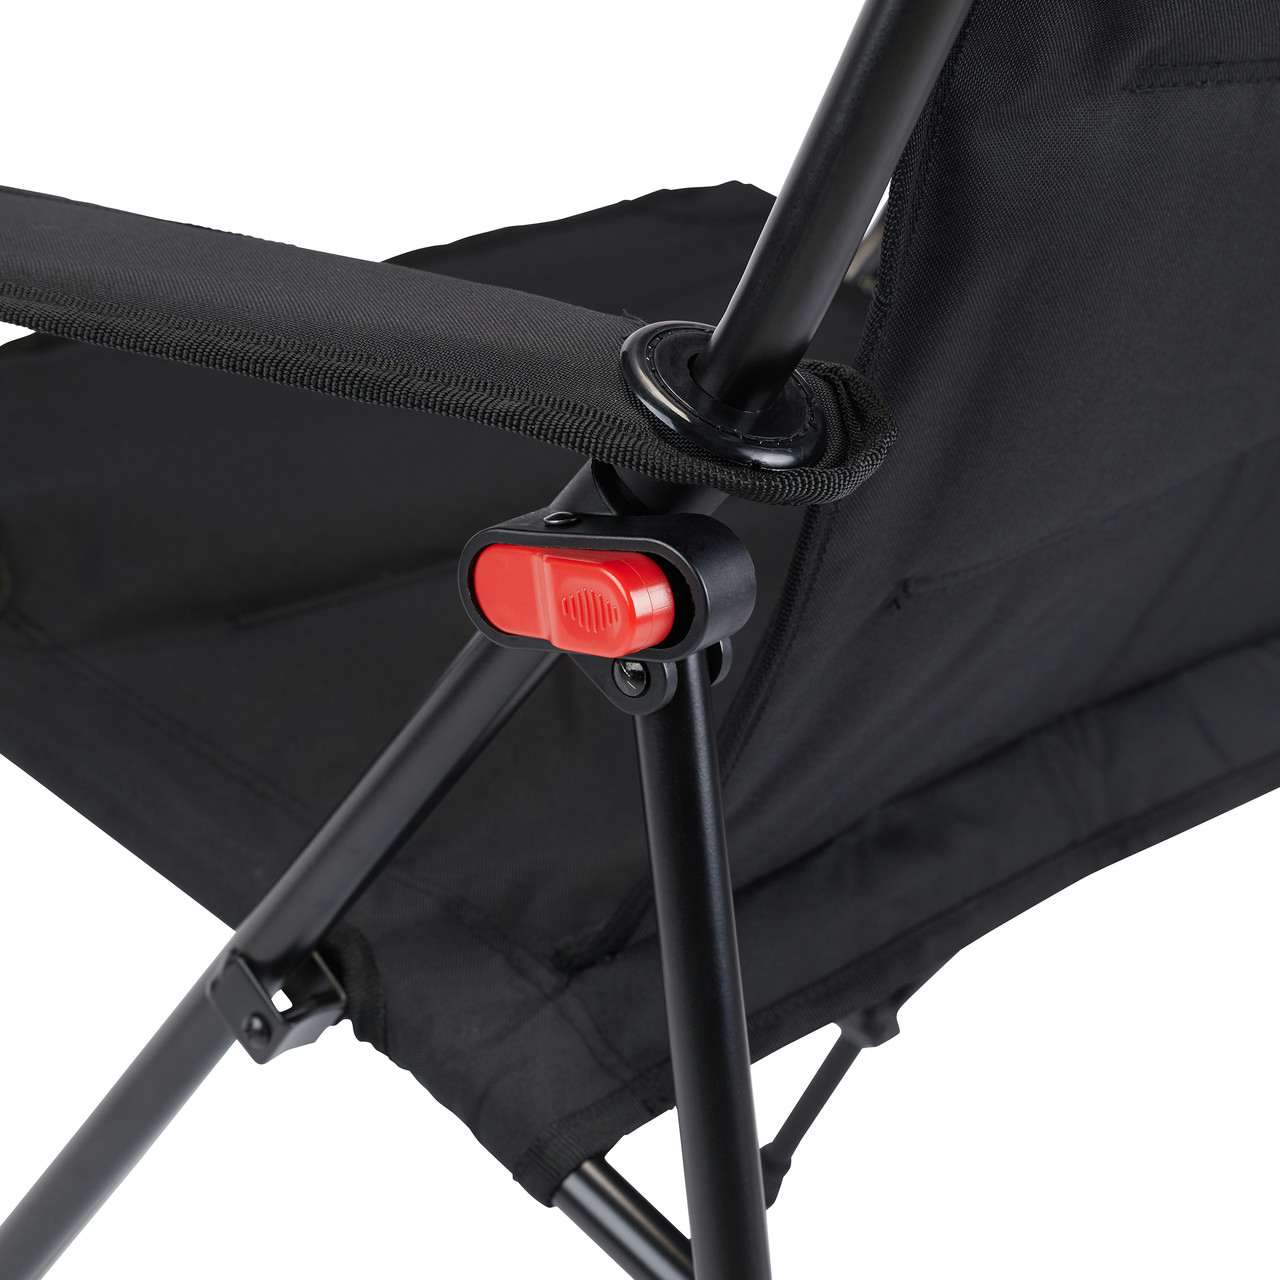 Base Camp Chair Deluxe Black